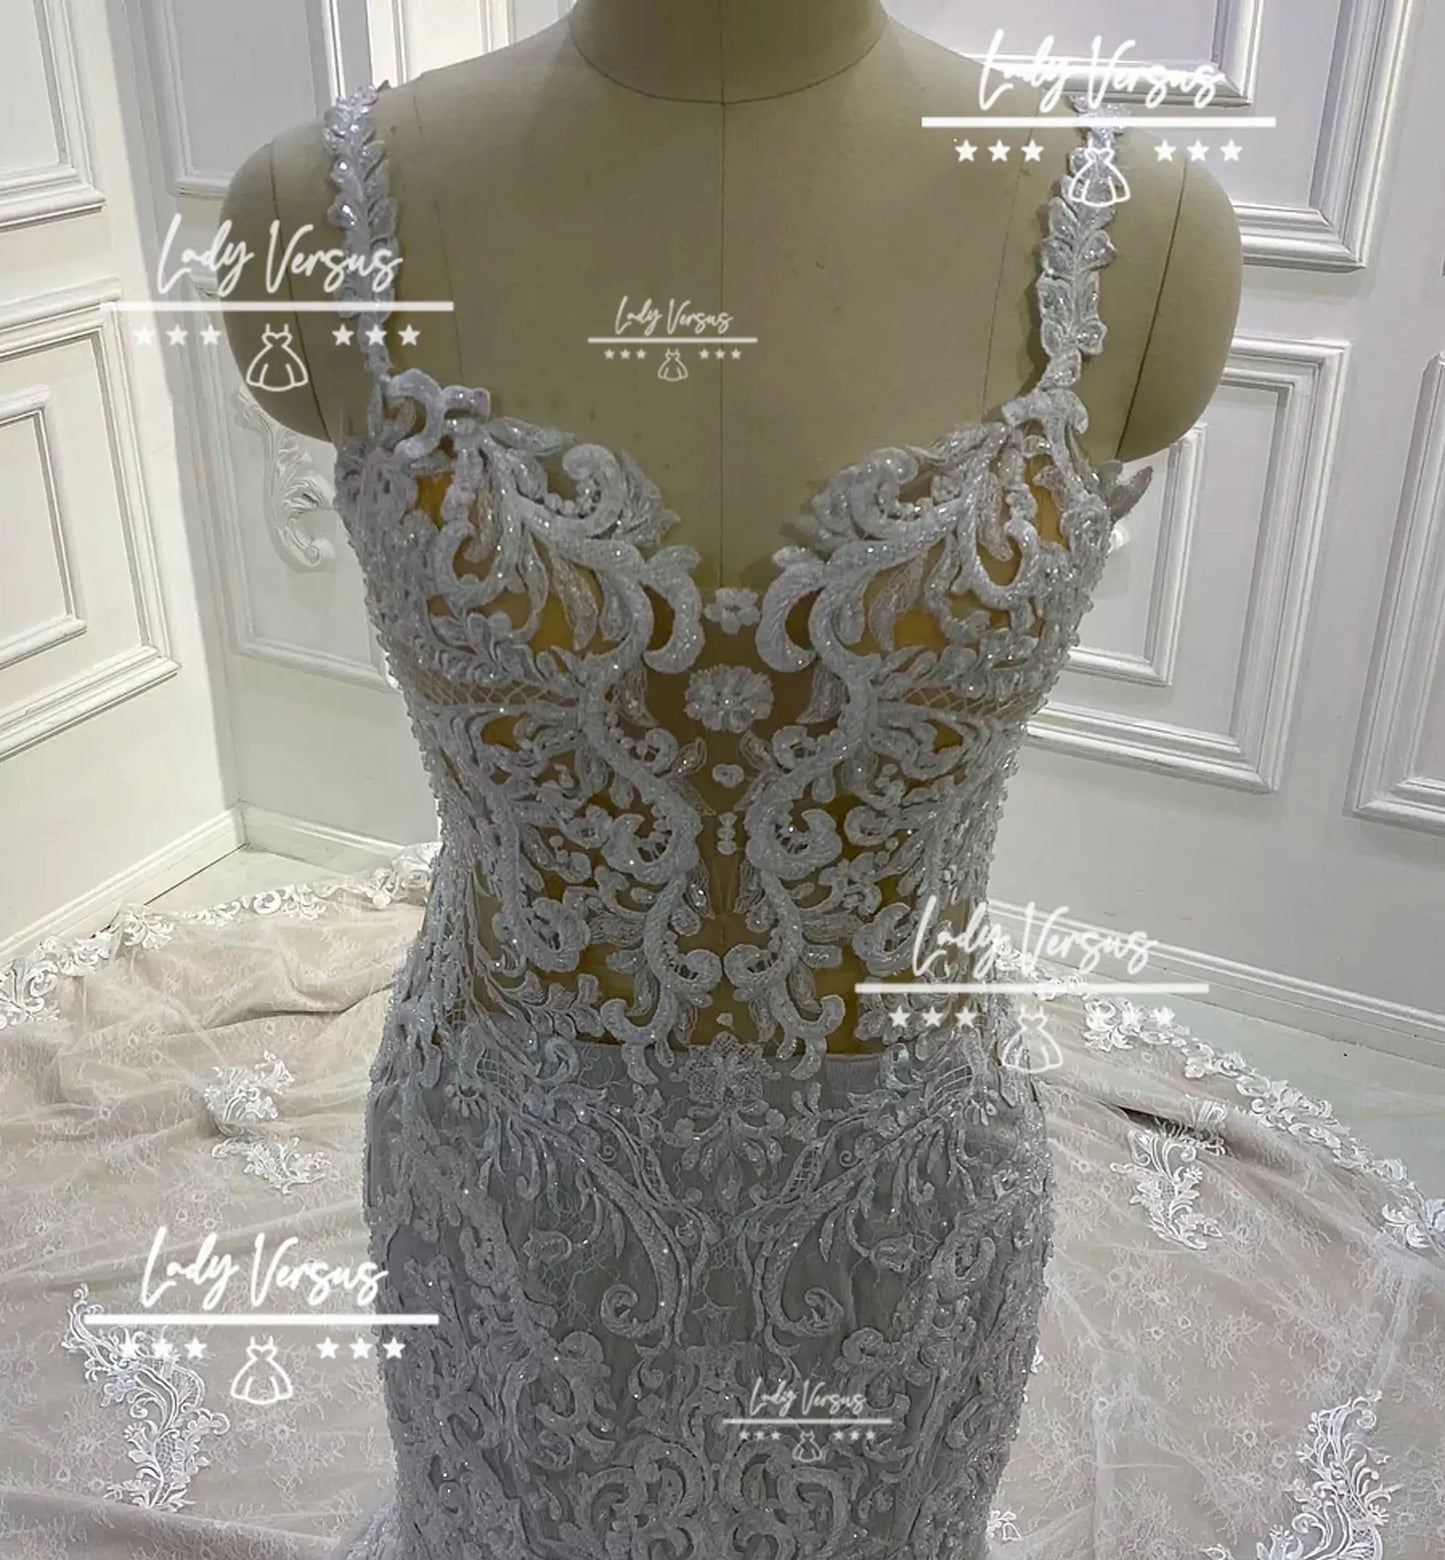 Luxury bridal mermaid style dress/ Extravagant bridal gown/Gorgeous hand beaded wedding dress/ ball gown Lady Versus